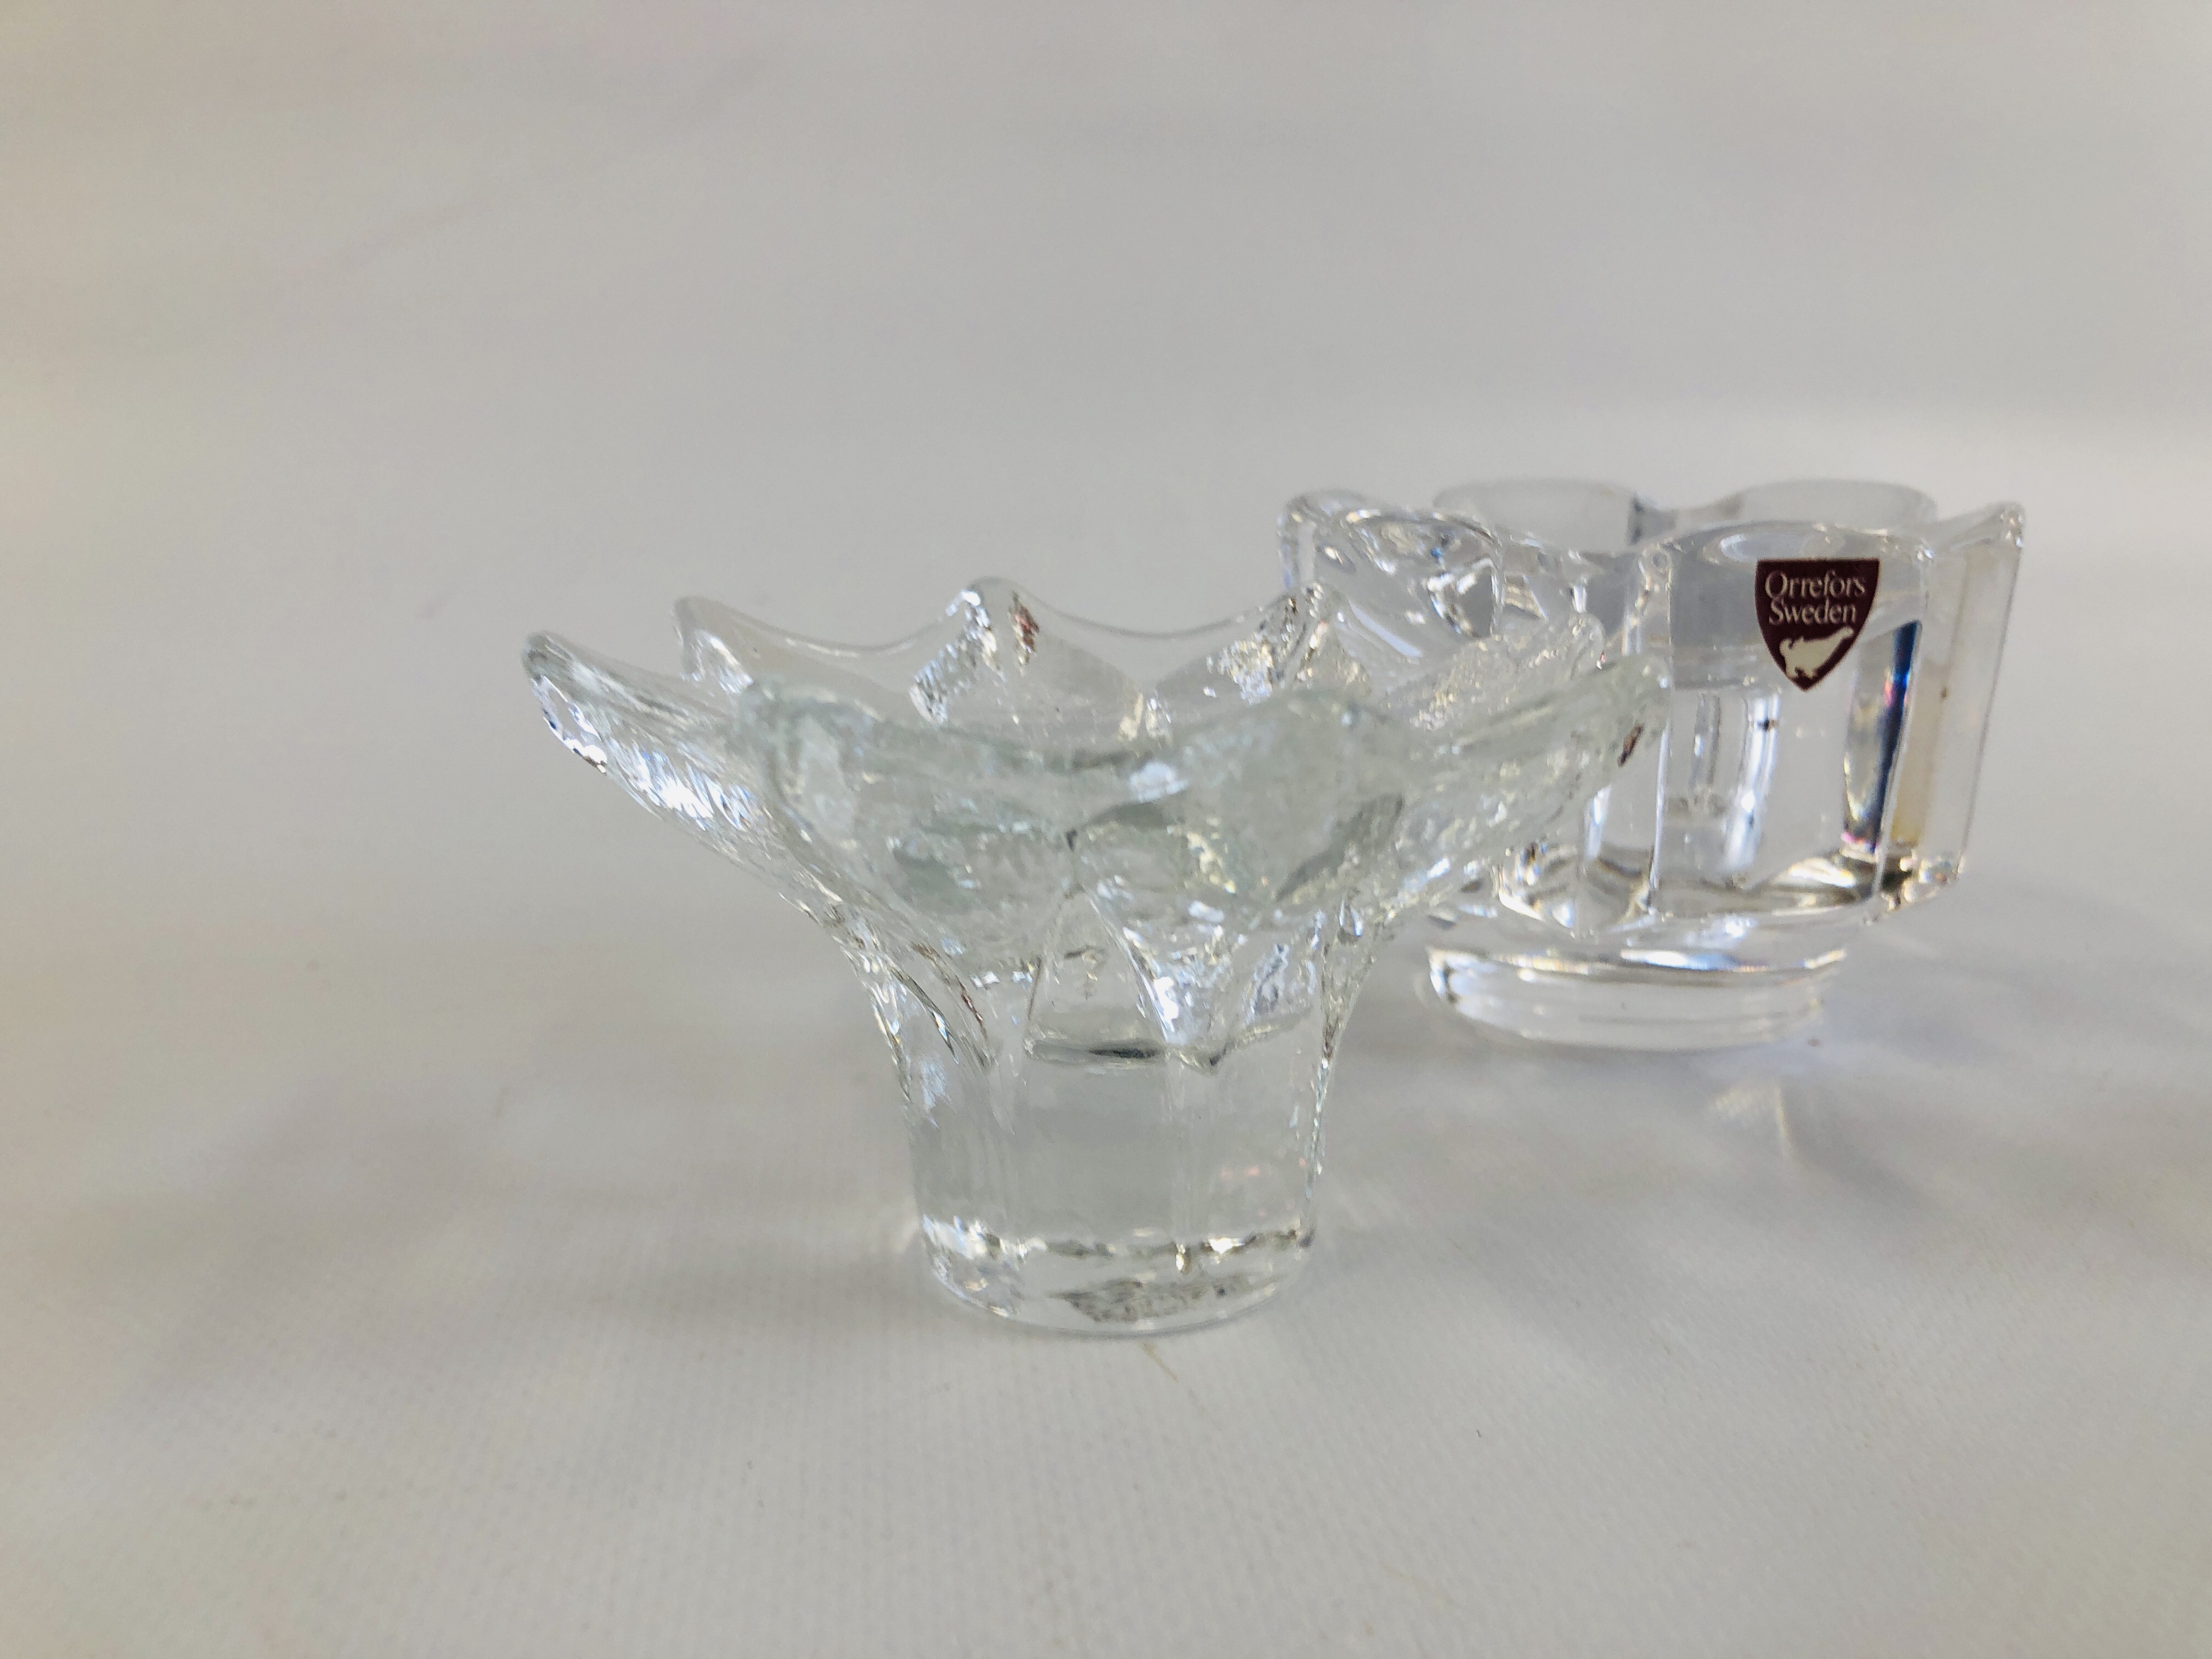 TWO ORREFORS GLASS CANDLE HOLDERS AND ONE ORREFORS HEAVY GLASS CANDLE HOLDER - Image 3 of 4